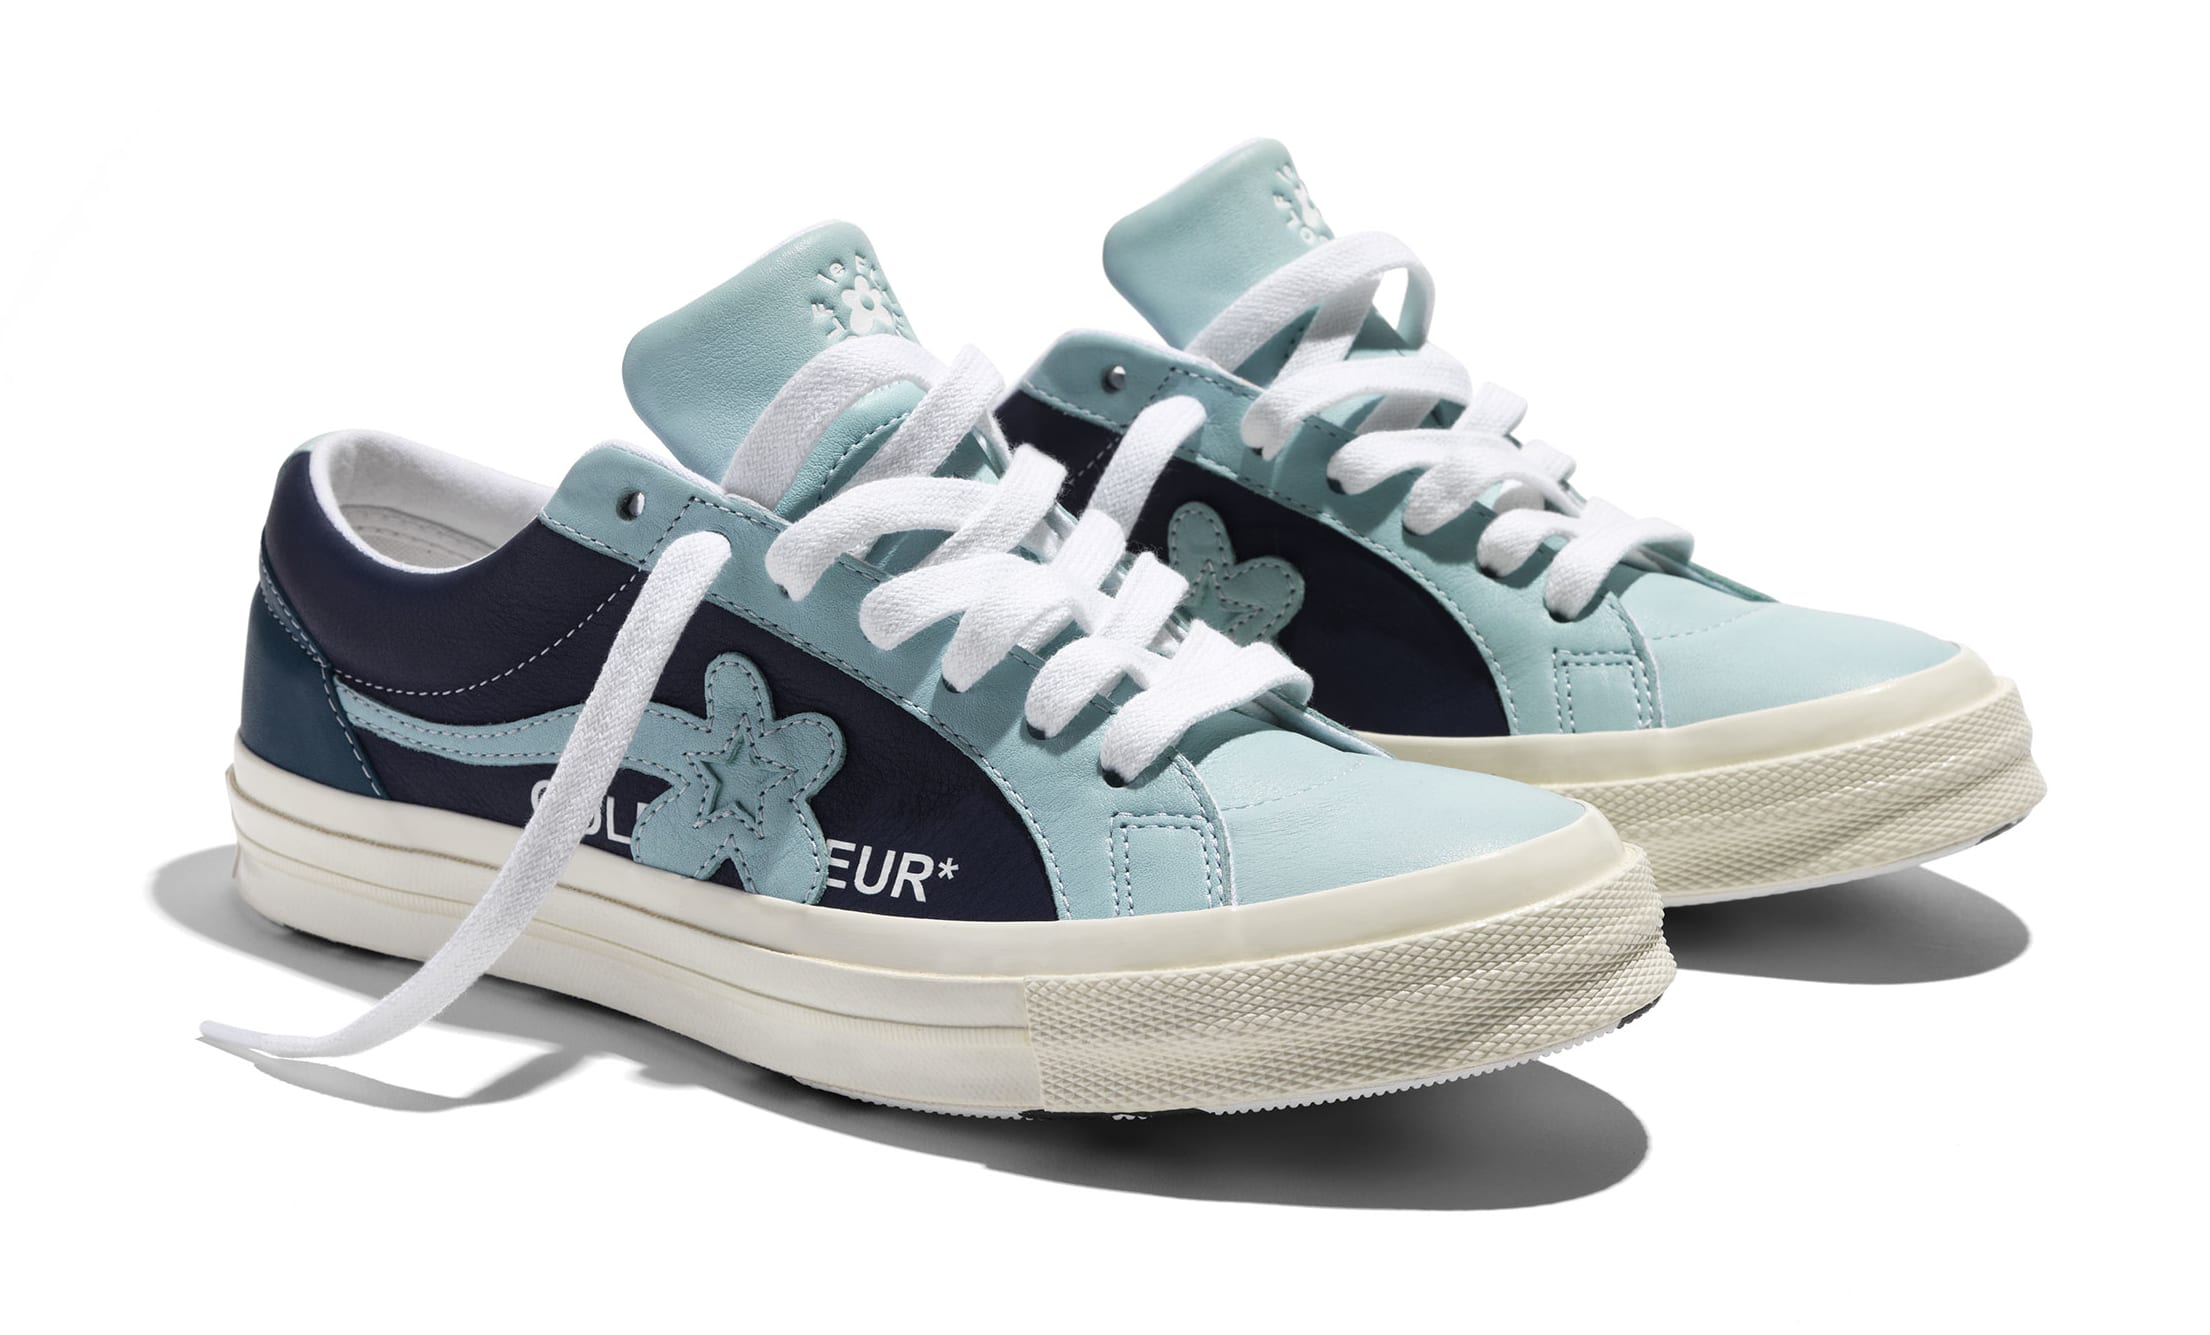 Another Look At The Converse Golf Le Fleur 'Industrial' Pack | Complex